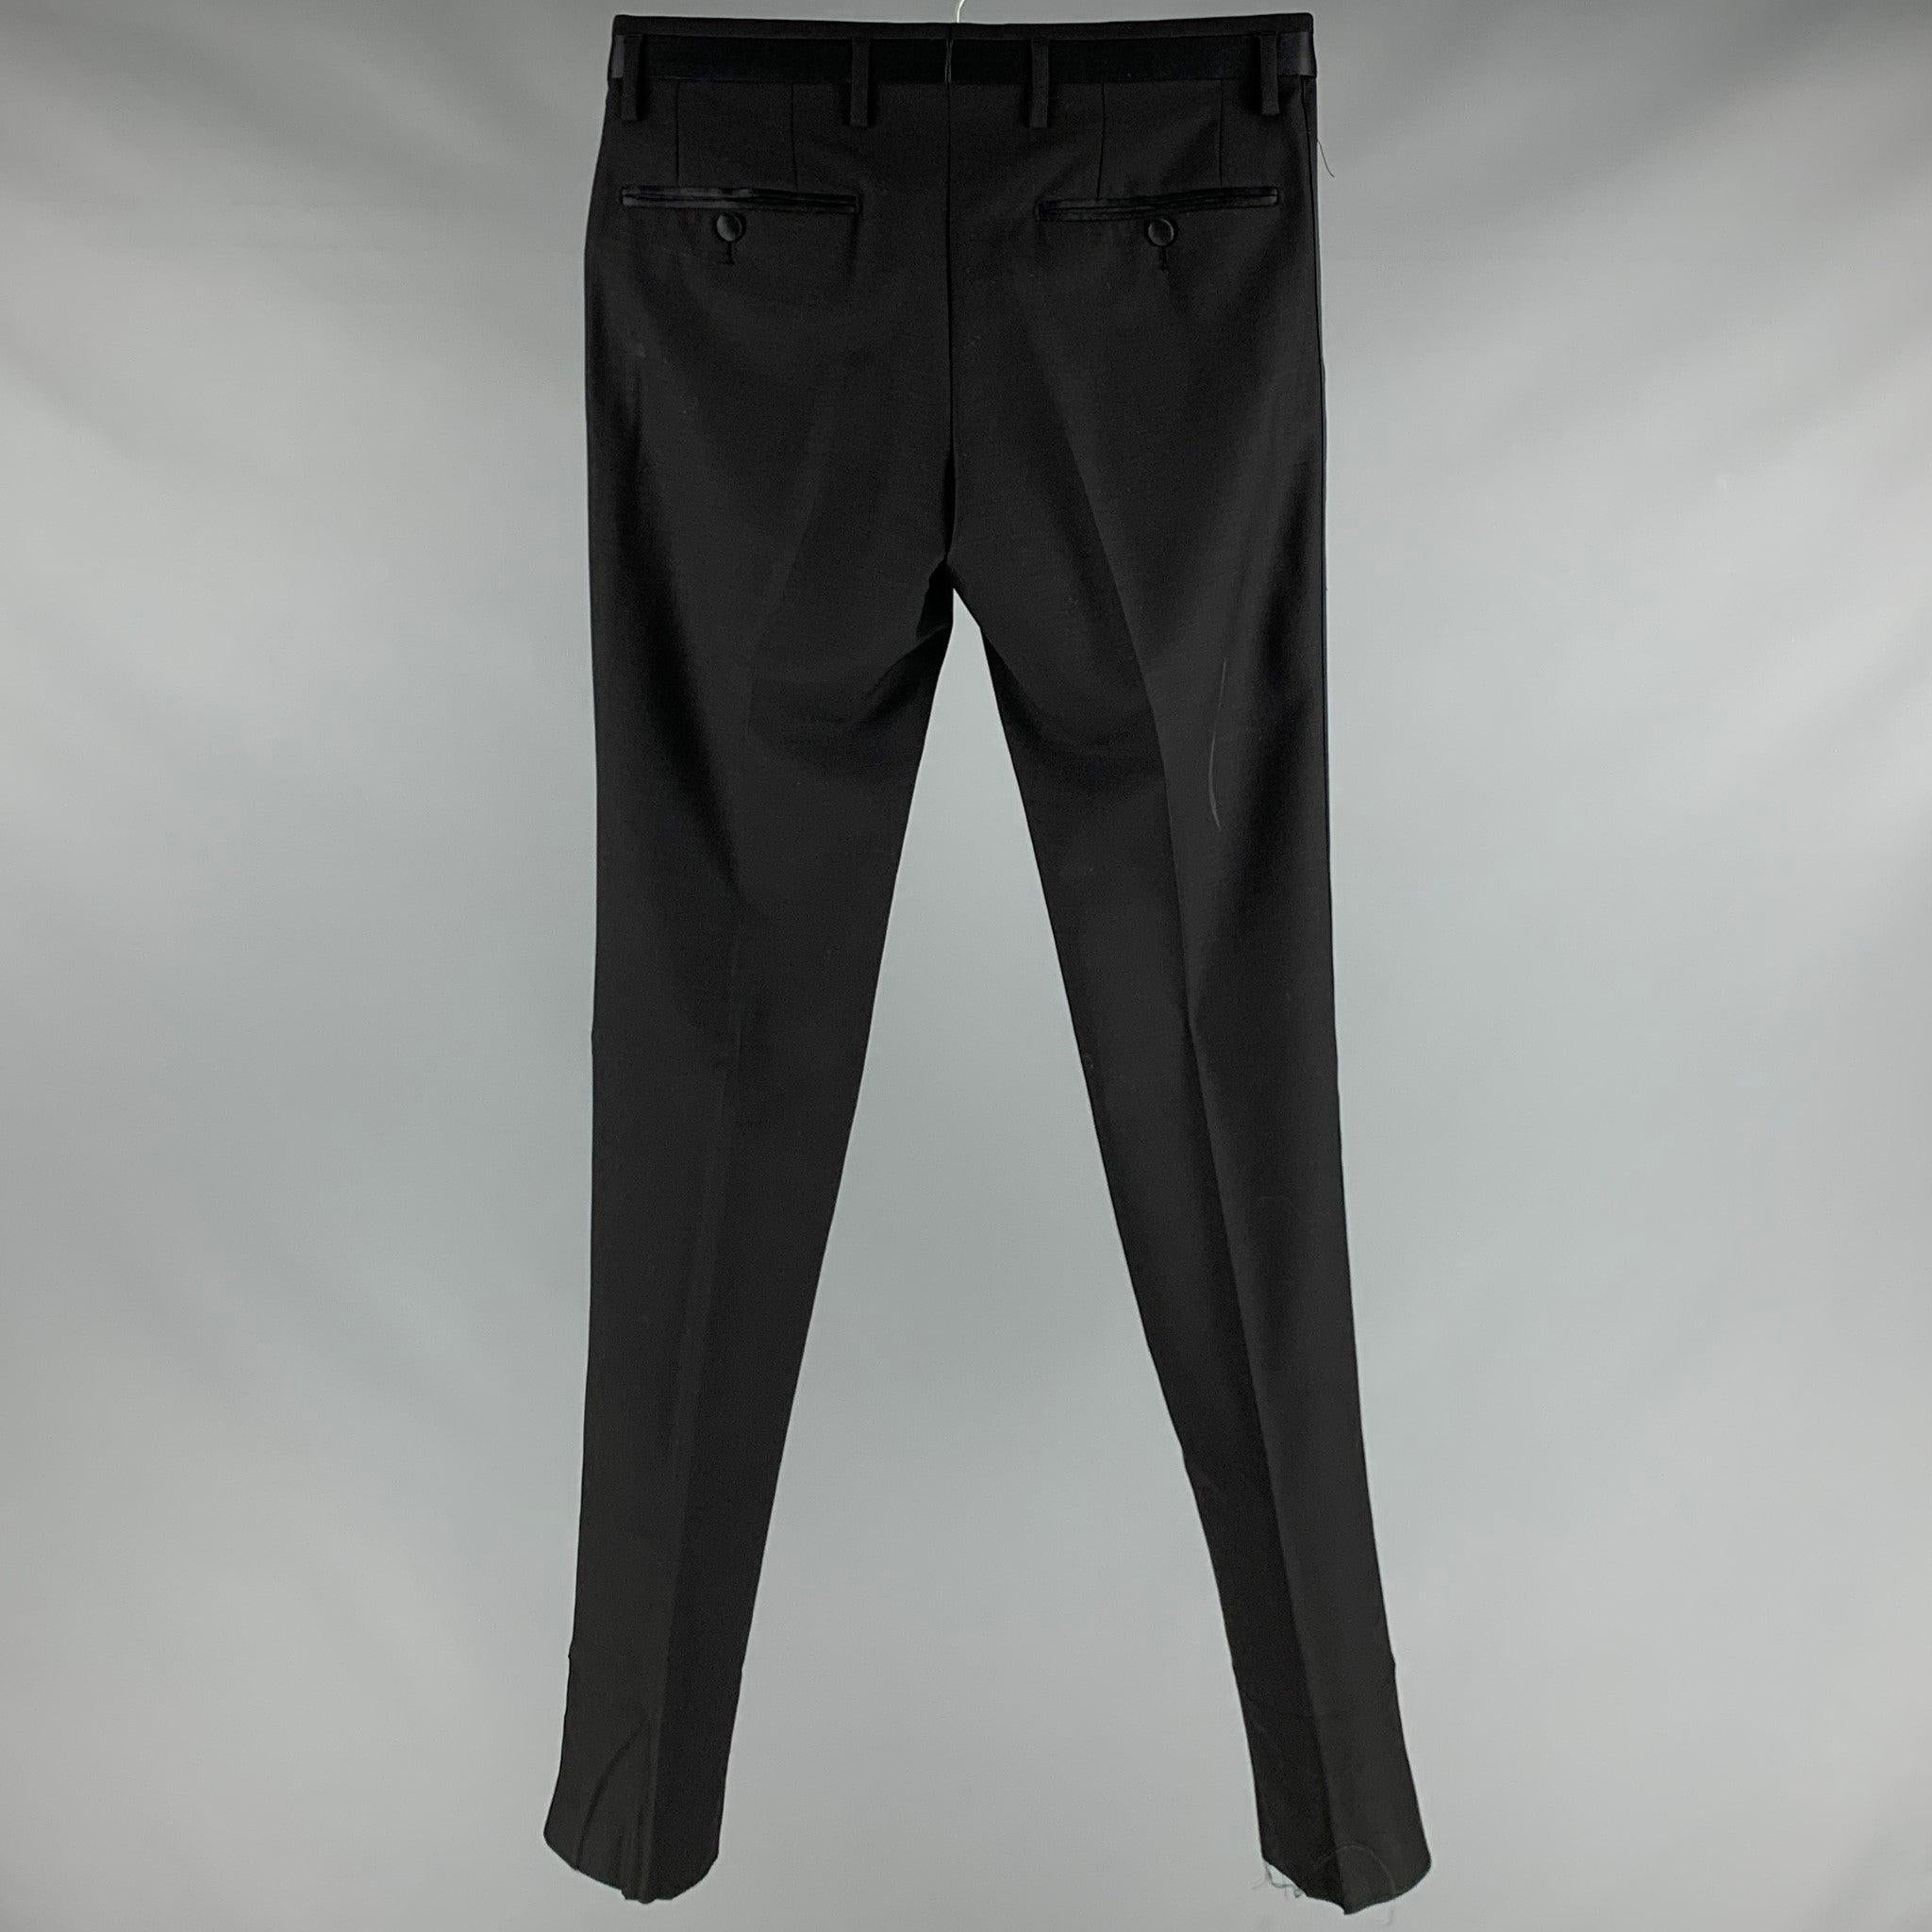 DOLCE & GABBANA dress
pants in a black wool fabric featuring satin waistband and stripes, flat front style, and zip fly closure. Made in Italy.Very Good Pre-Owned Condition. Moderate marks. 

Marked:  IT 44 

Measurements: 
 Waist: 28 inches Rise: 7